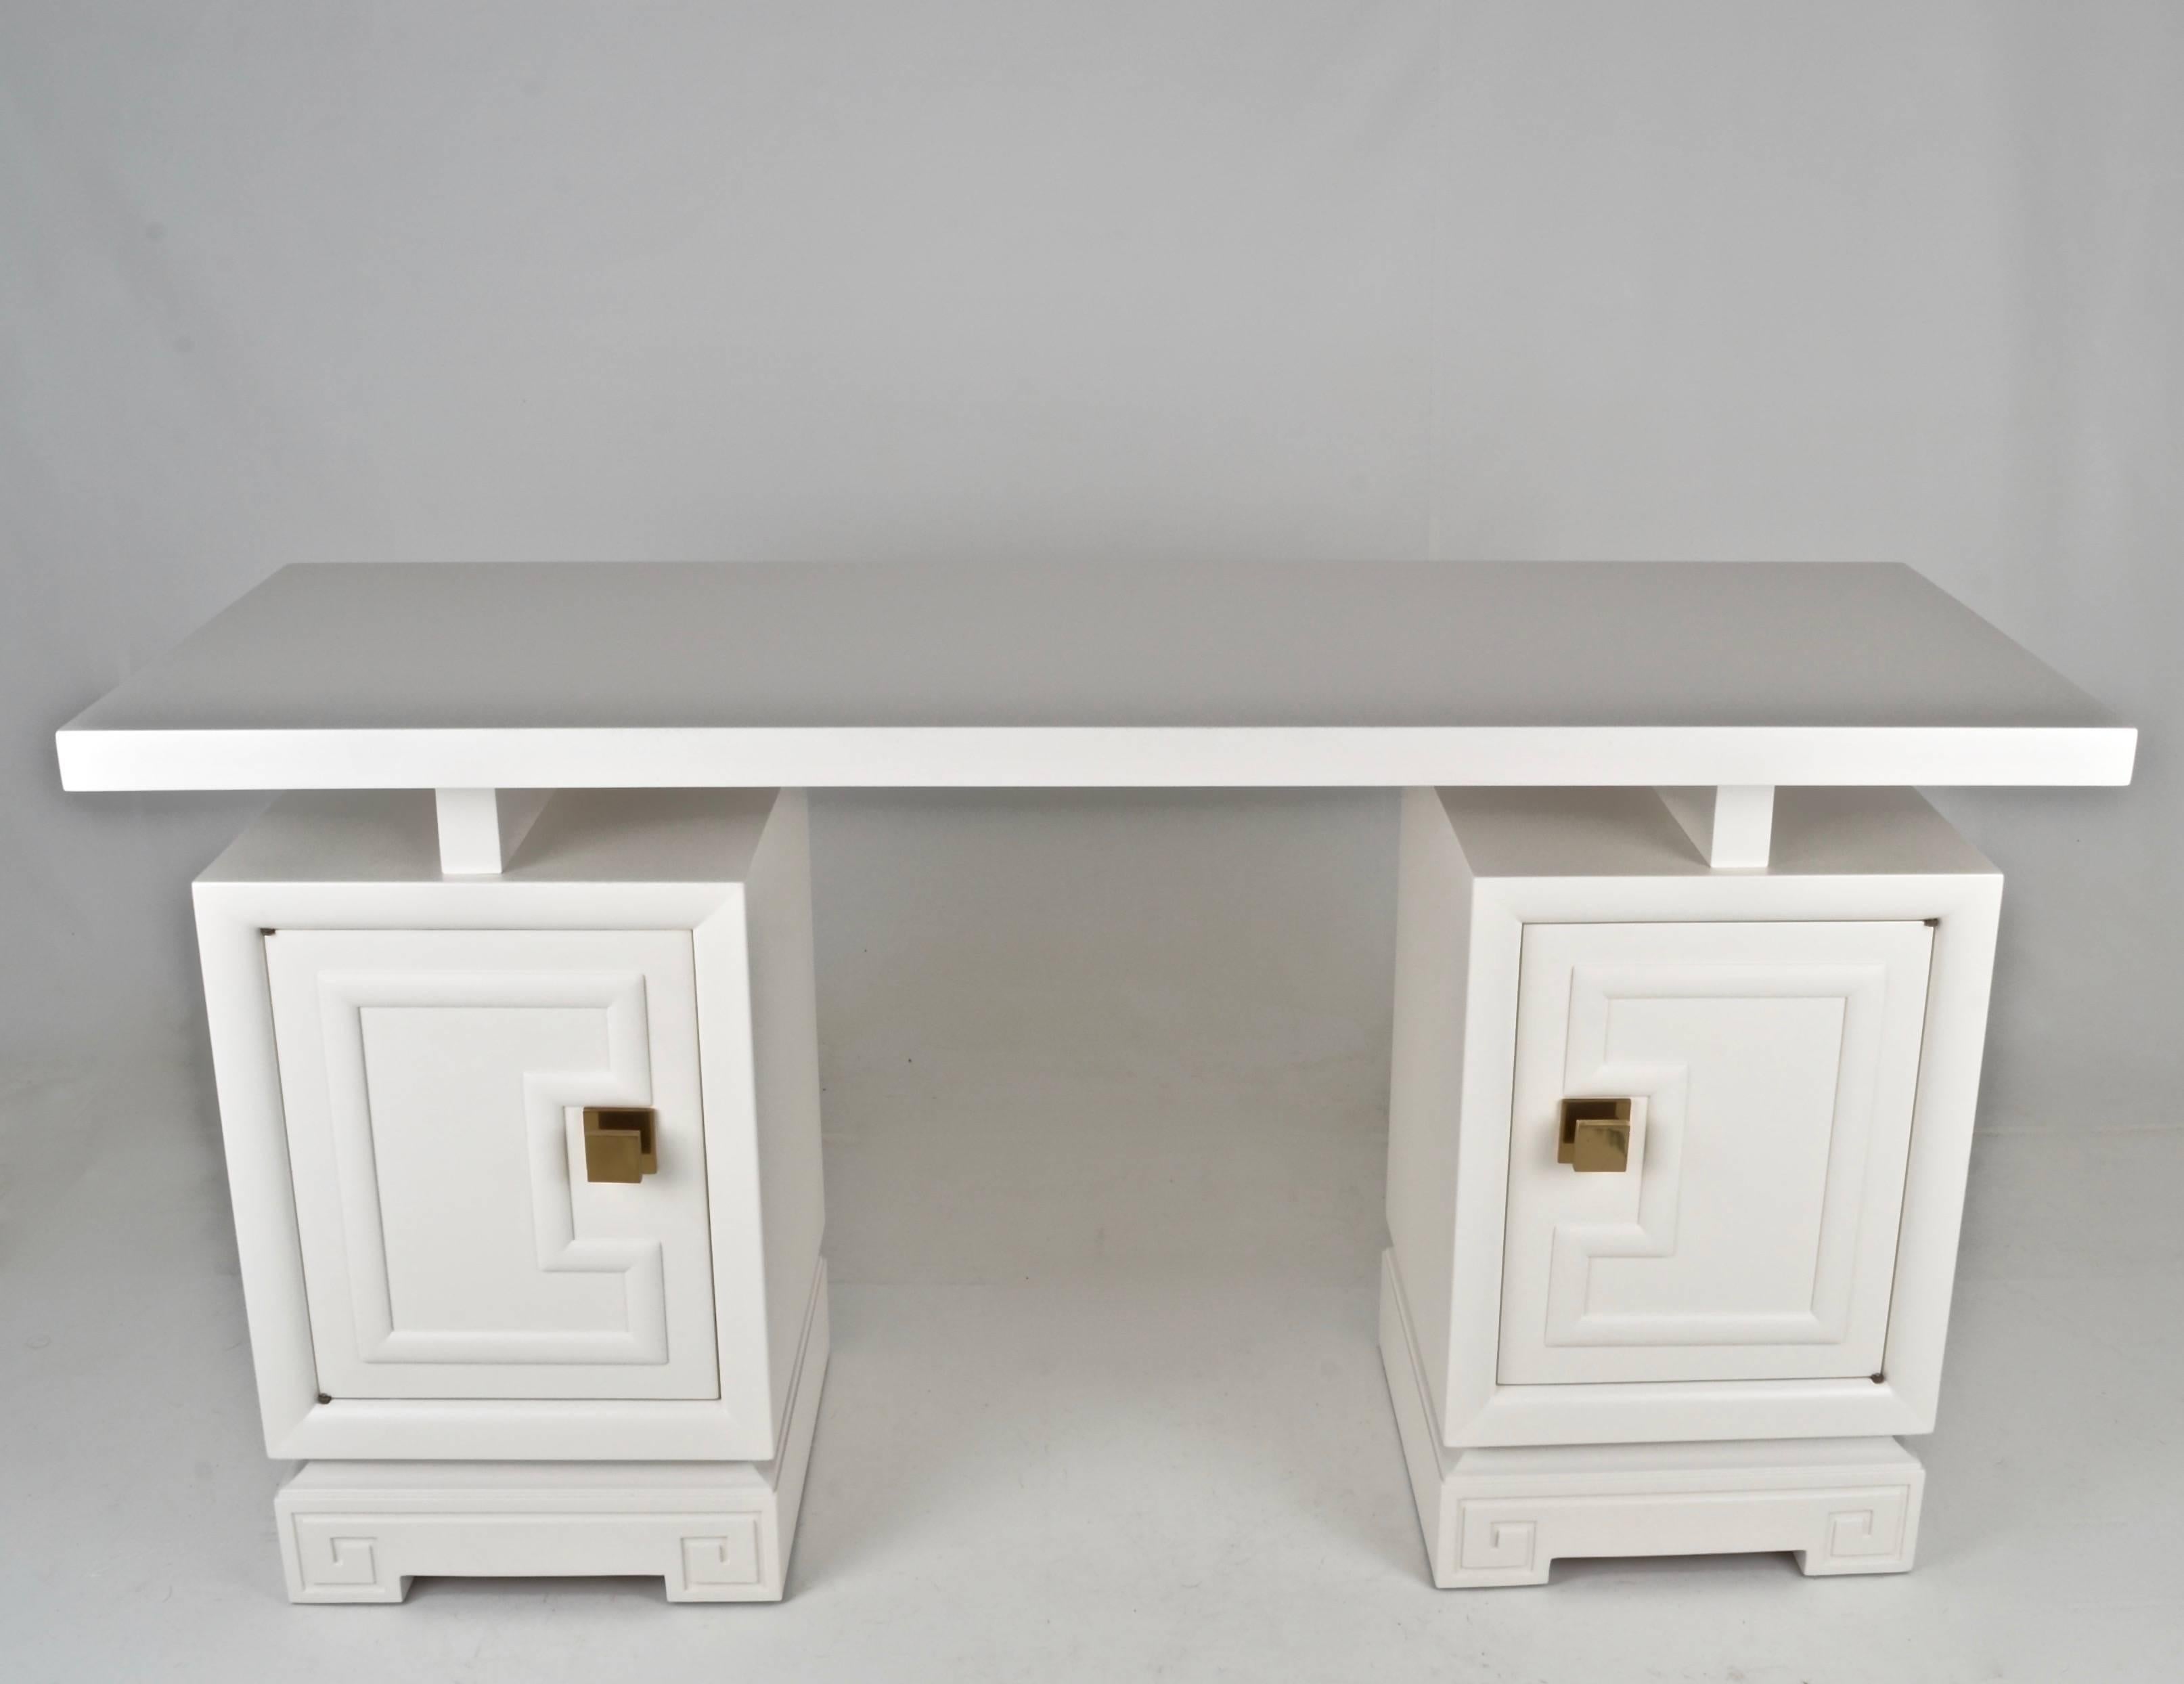 Newly lacquered in satin finish dove white lacquer, this is a charming desk/dressing table/sofa table/bar. Very Fine quality construction with heavy square brass pulls. Fitted interior drawers behind two doors. Finished back allows piece to be